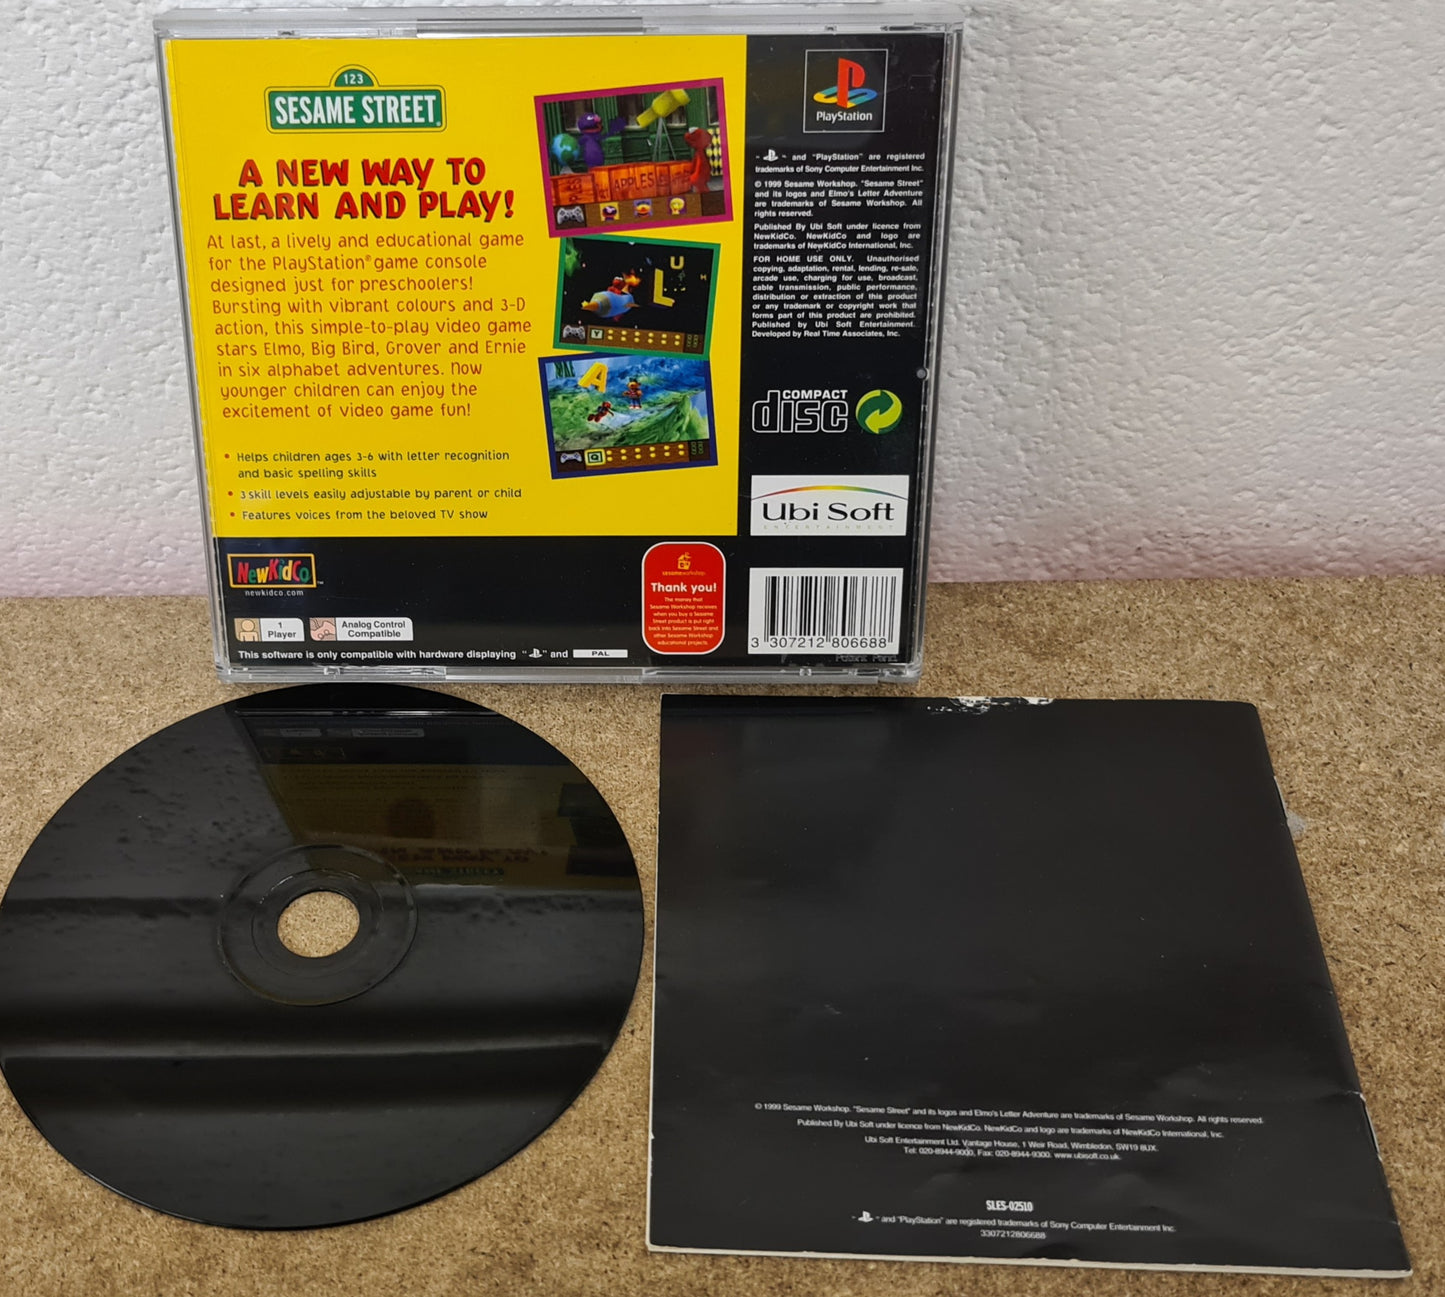 Elmo's Letter Adventure Sony Playstation 1 (PS1) Game